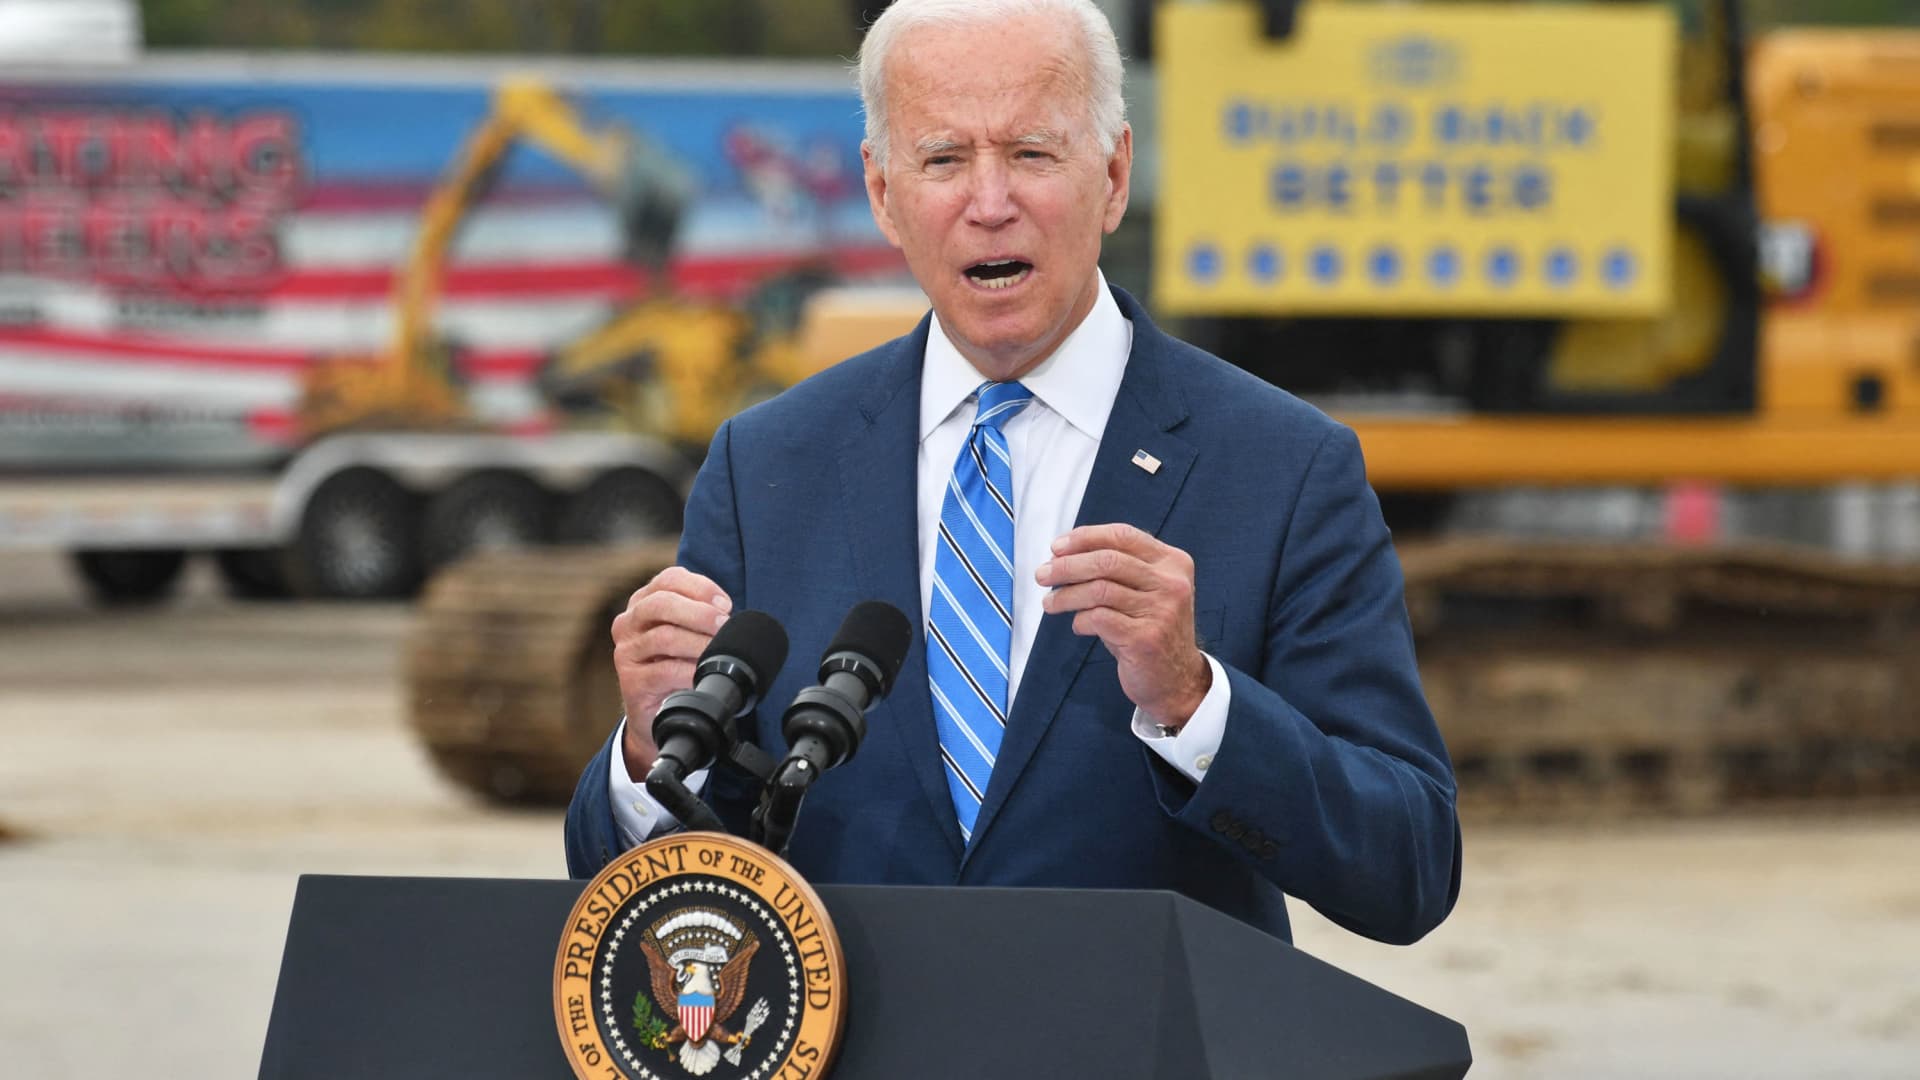 US President Joe Biden speaks about the bipartisan infrastructure bill and his Build Back Better agenda at the International Union of Operating Engineers Training Facility in Howell, Michigan, on October 5, 2021.